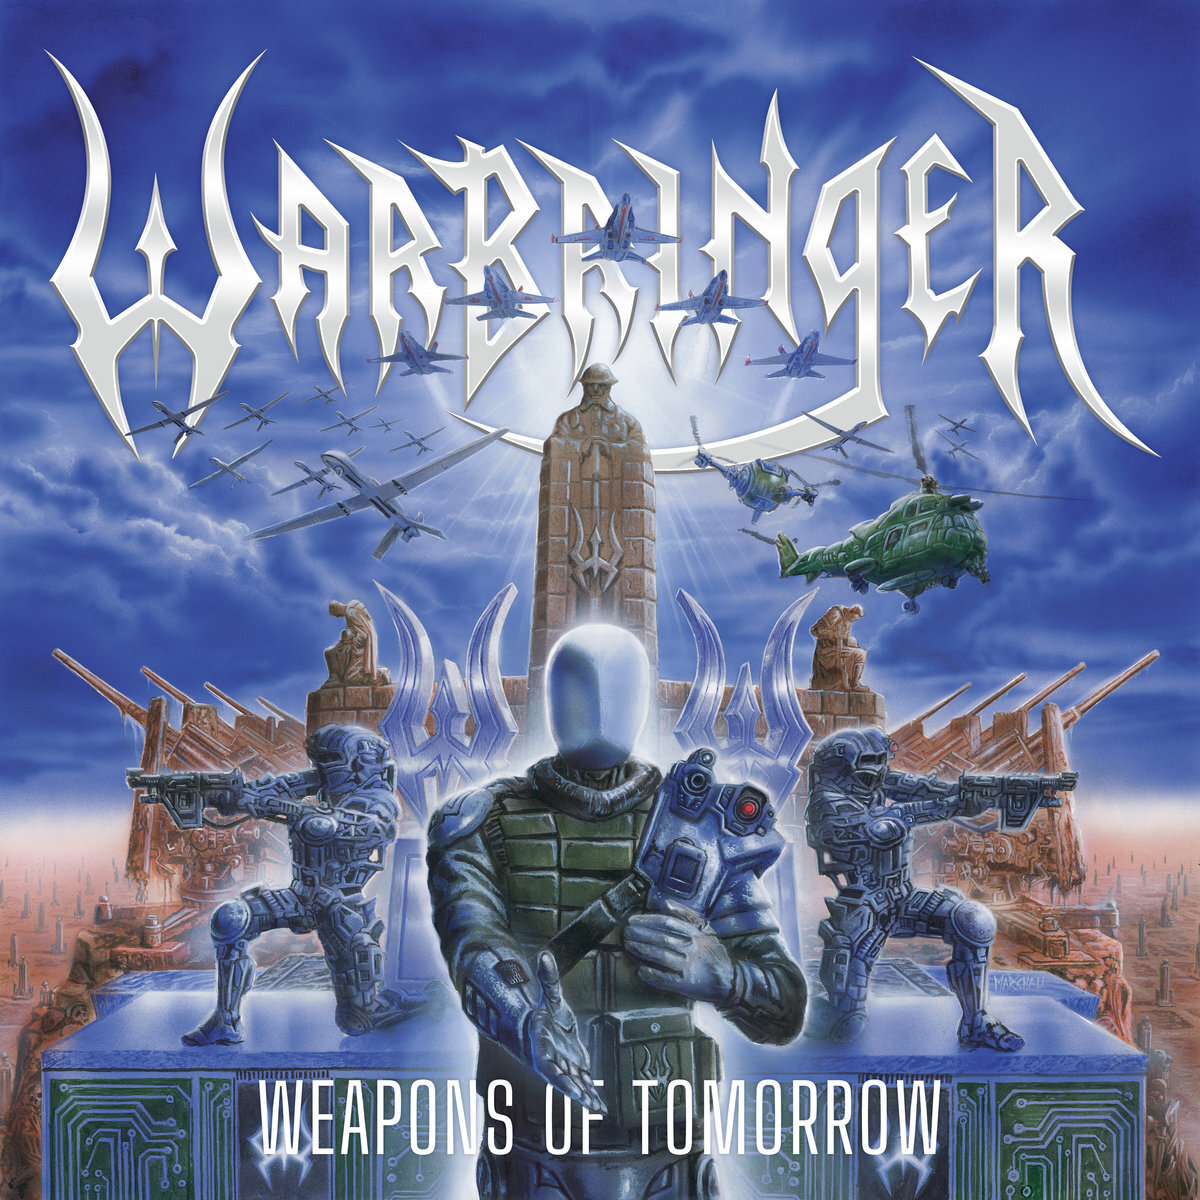 Vol 5, Track 9: ”Weapons of Tomorrow” by Warbringer